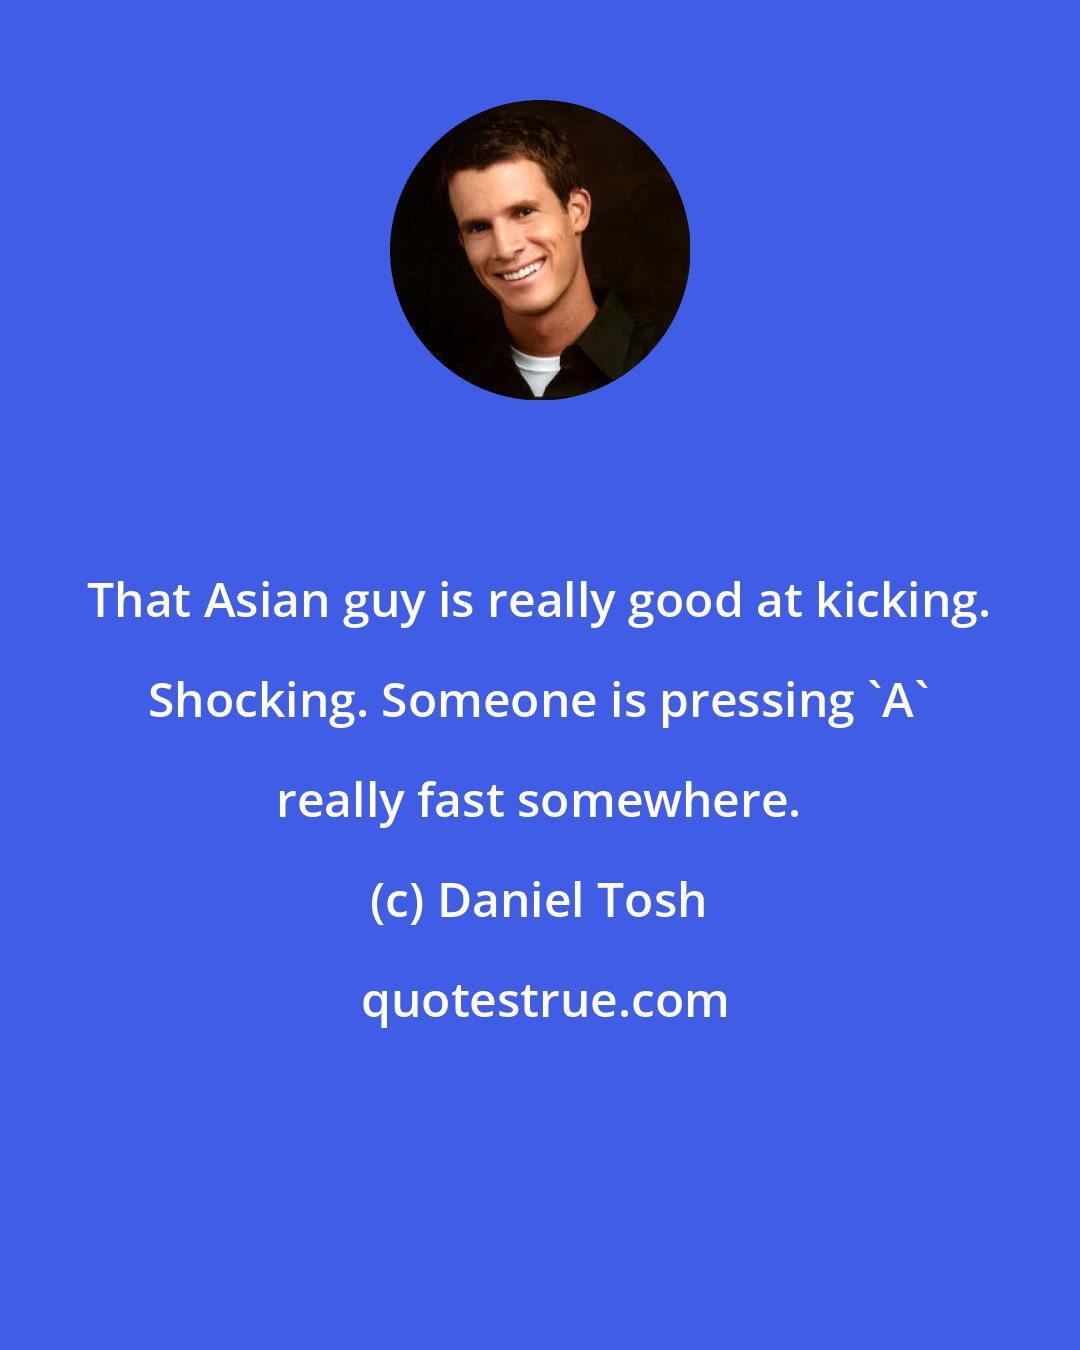 Daniel Tosh: That Asian guy is really good at kicking. Shocking. Someone is pressing 'A' really fast somewhere.